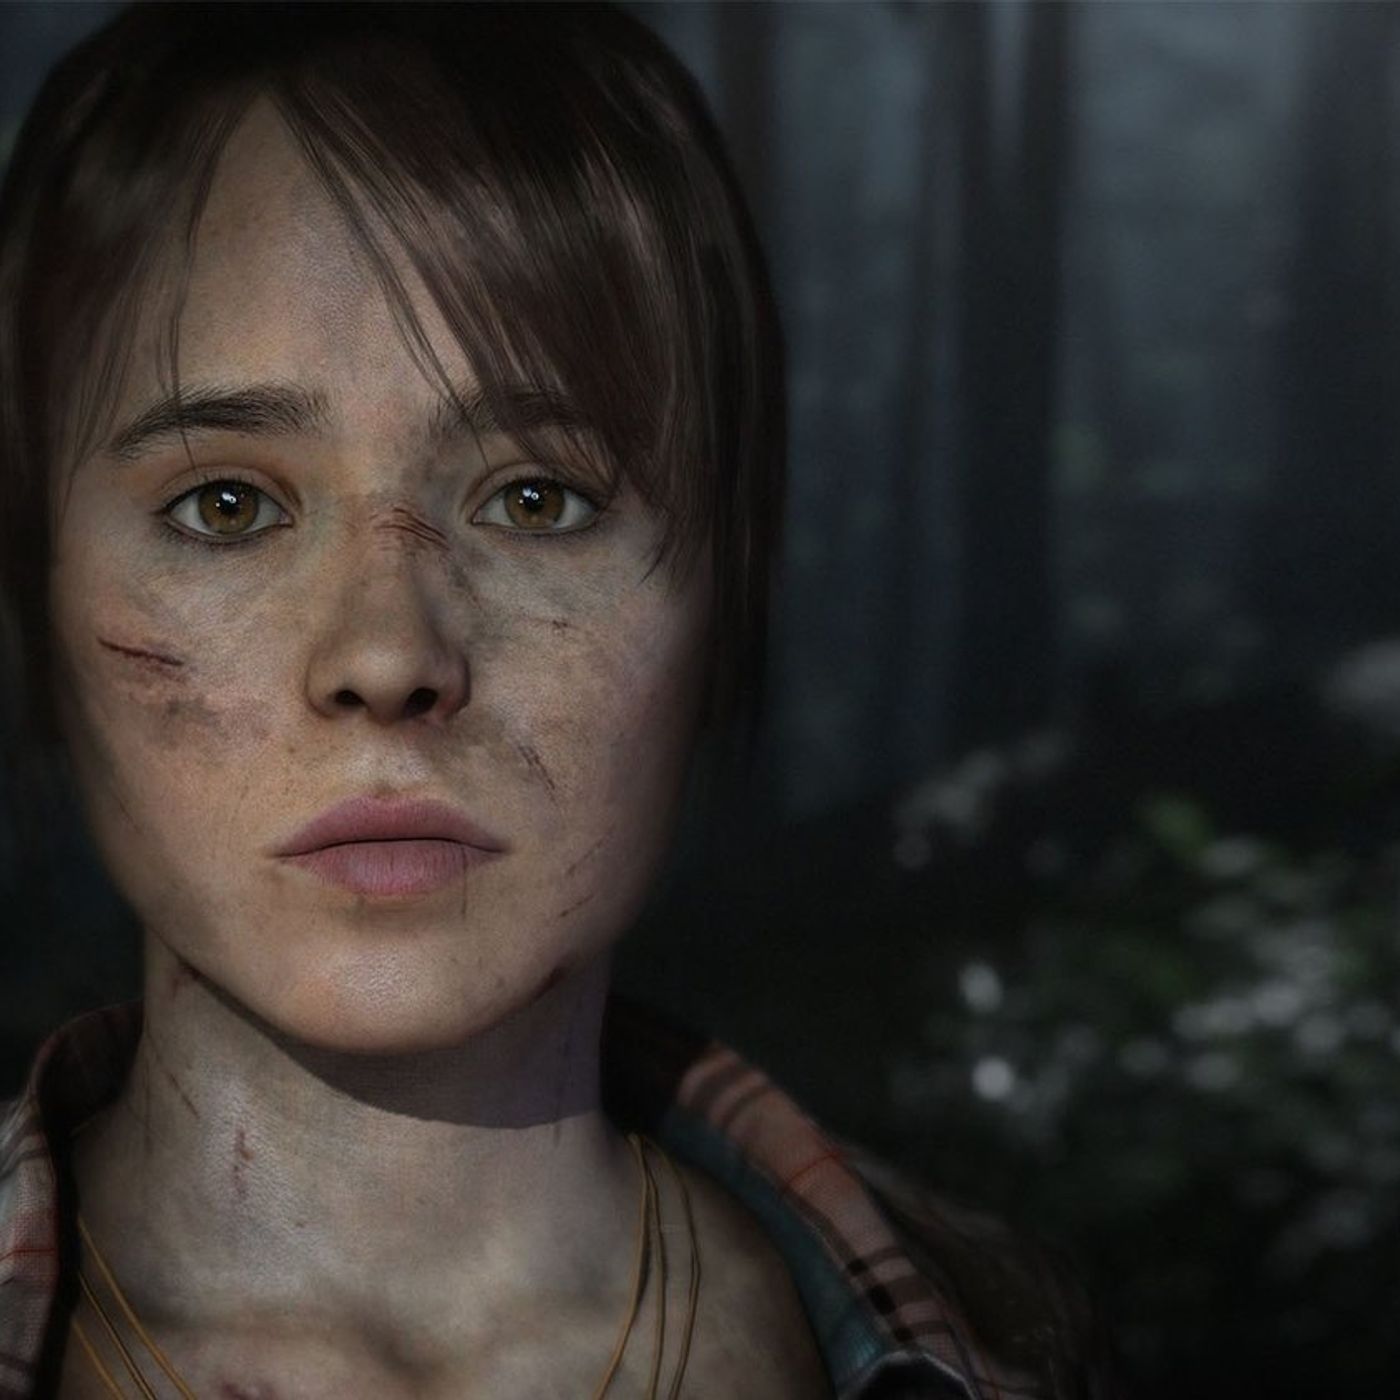 MINIGAME: The Organic Storytelling of ‘Beyond: Two Souls’